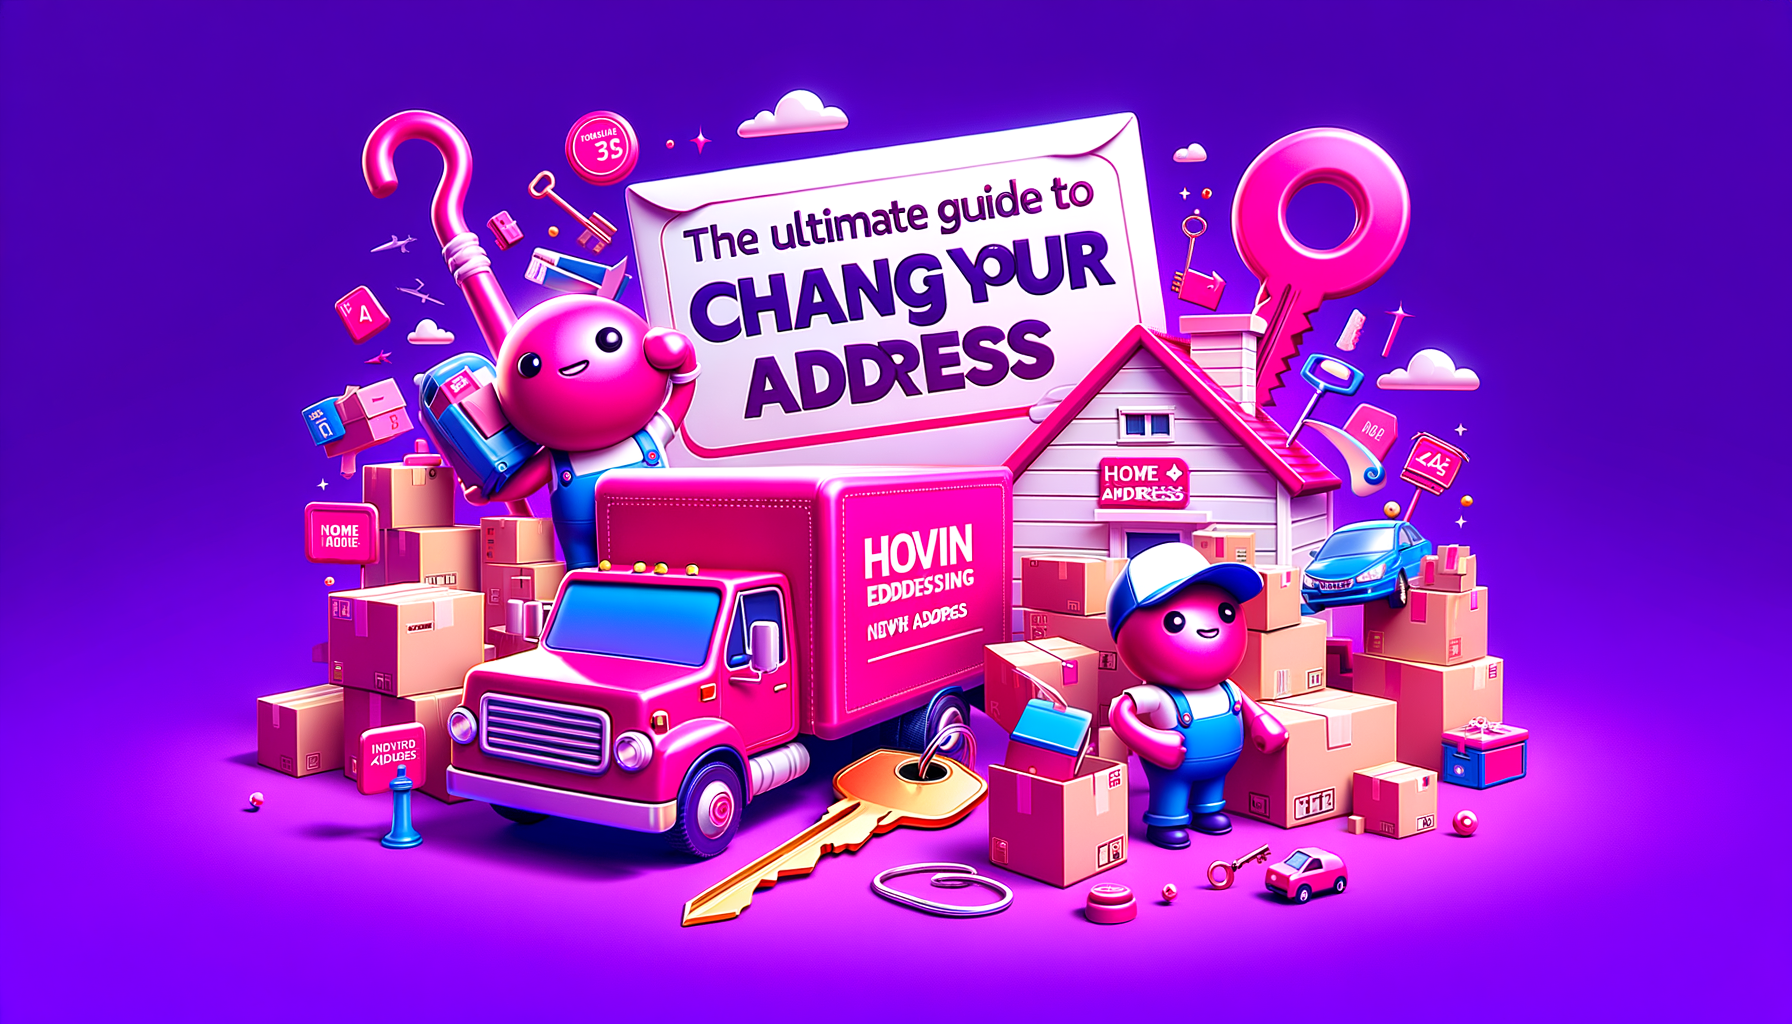 Illustration of a fuschia colored cartoon moving truck symbolizing the process of changing an address.